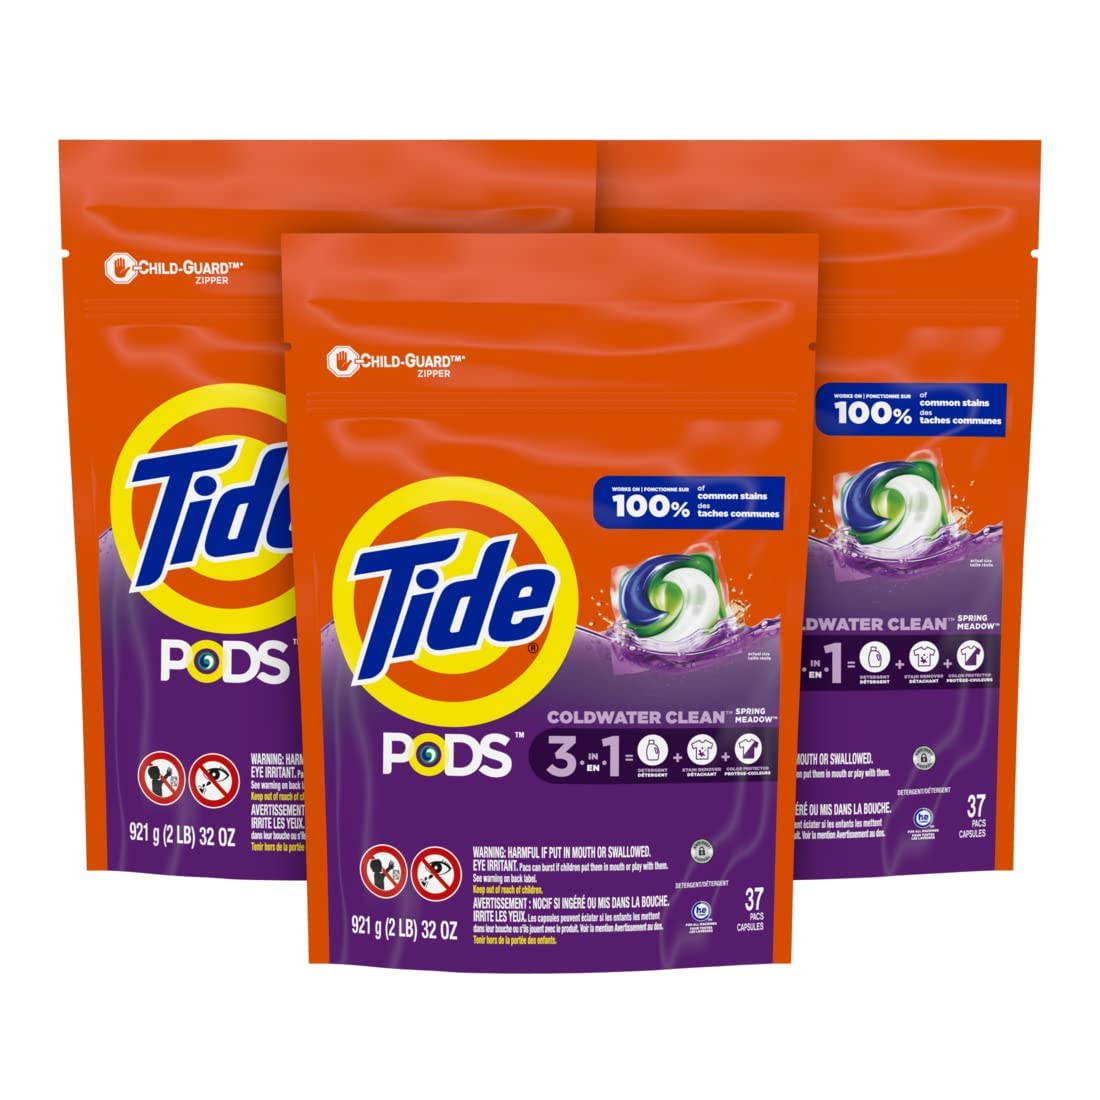 Ymmv Tide PODS Laundry Detergent Soap Pods, Spring Meadow, 37 Count (Pack of 3 Bag Value Pack), Total 111 Count, HE Compatible $19.52 A/C S&S at Amazon